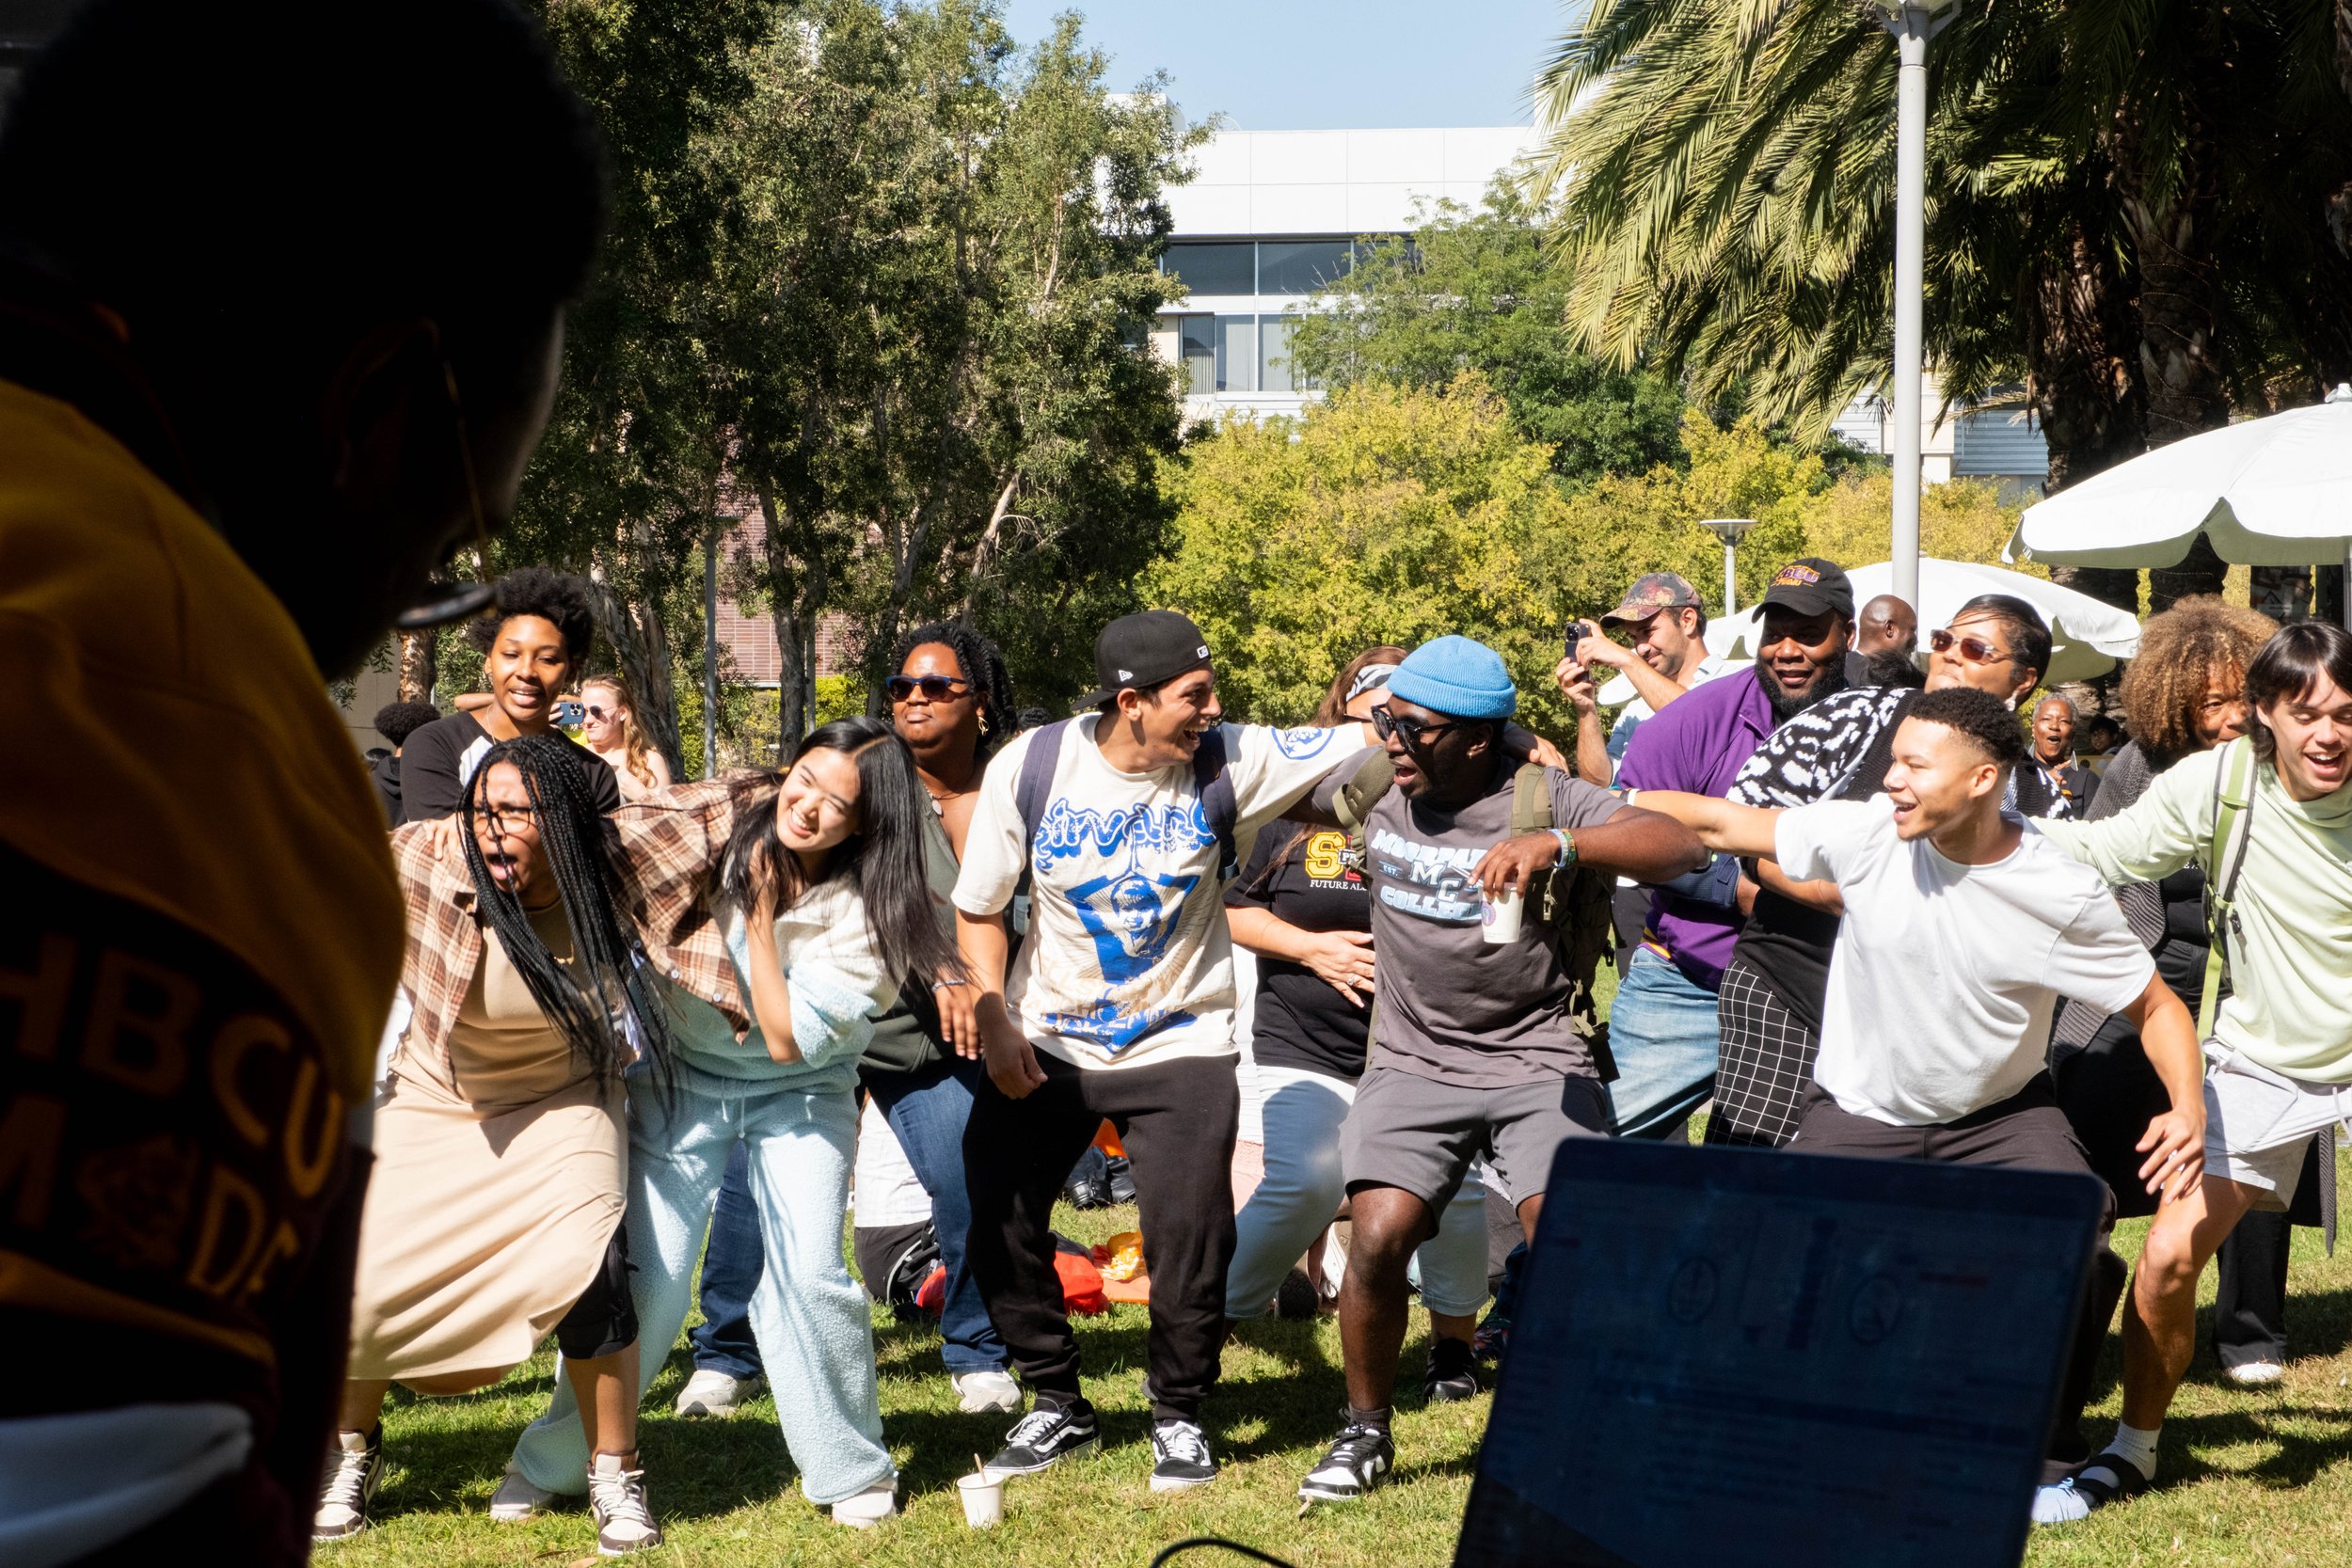  SMC students dancing in the last hour of the Histroically Black Colleges and Universities Caravan event held in Santa Monica College on Thursday, Oct. 26 (Danilo Perez | The Corsair) 